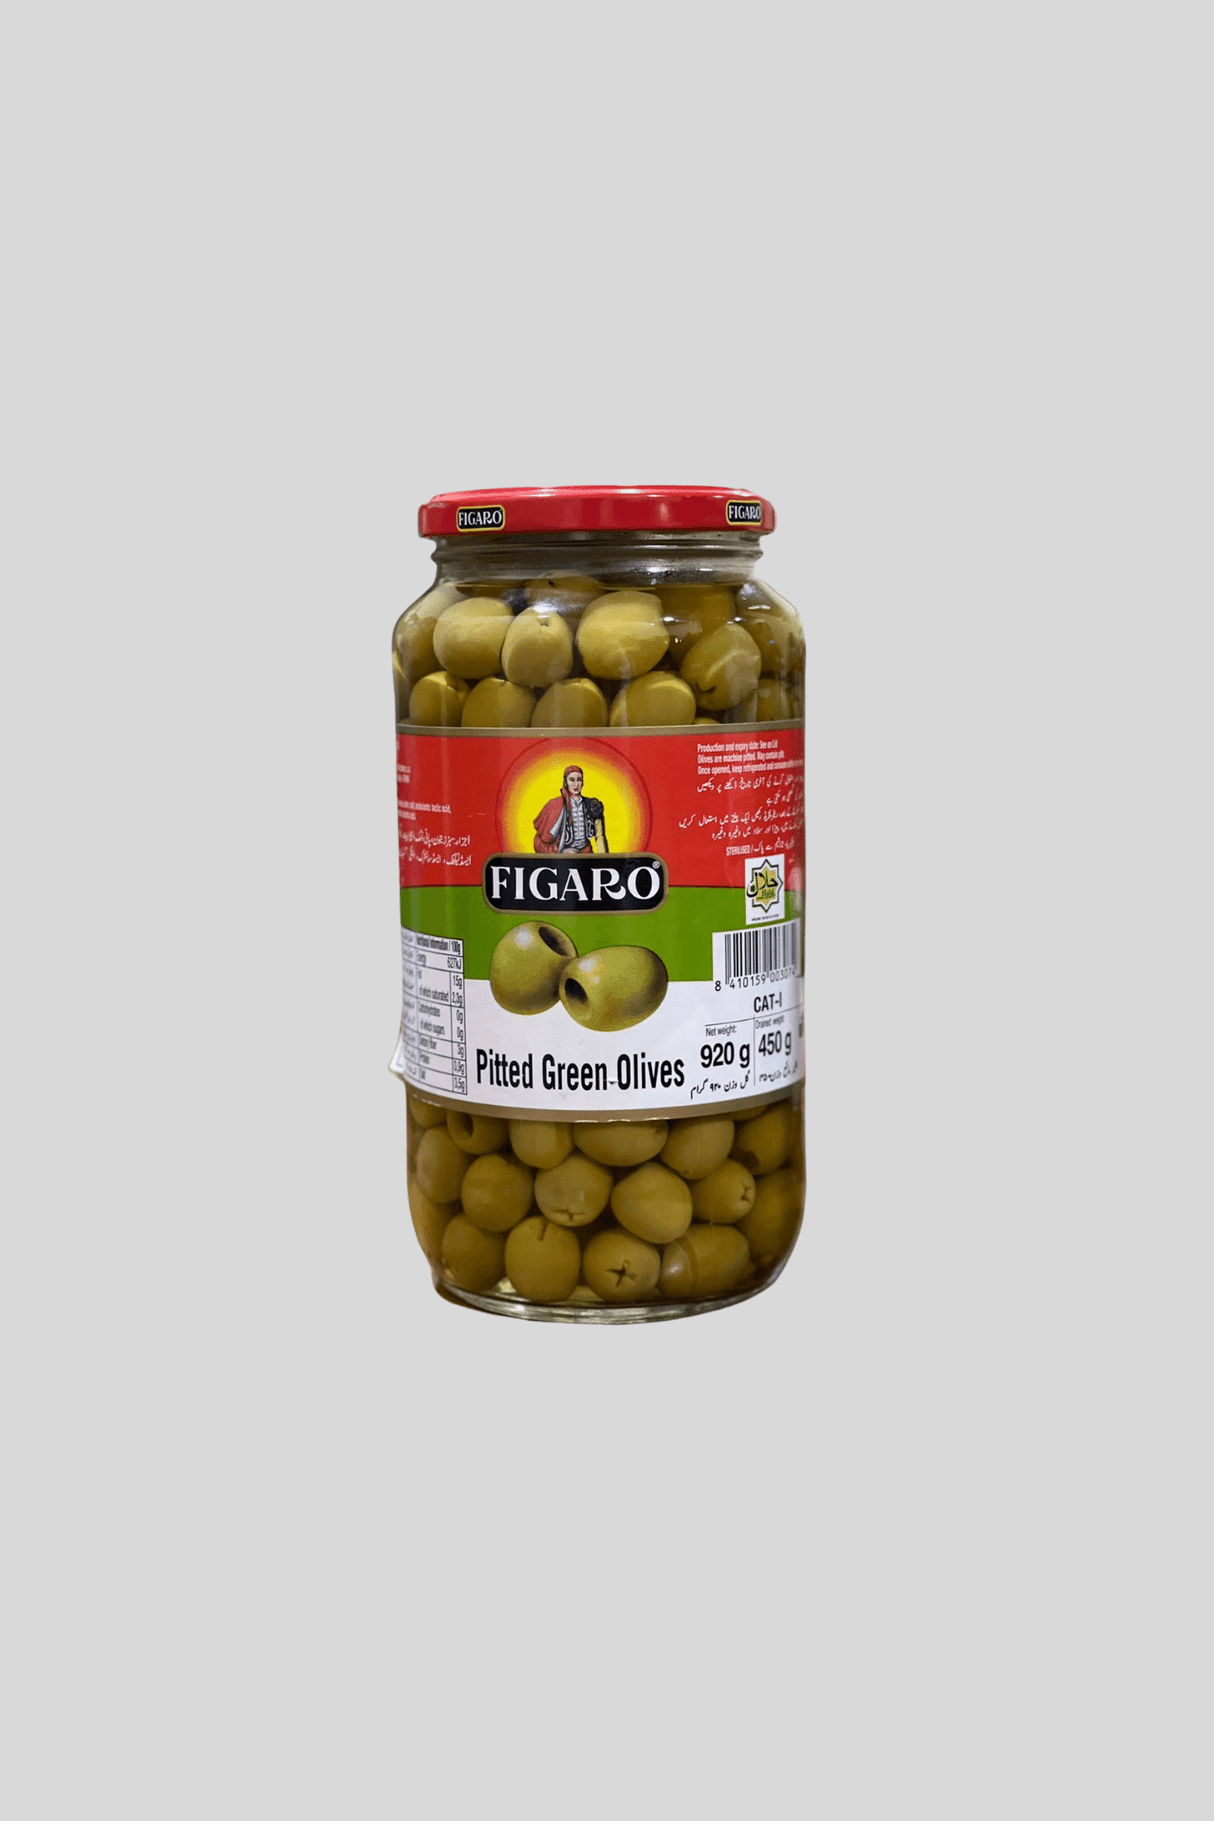 figaro olives green pitted 920g